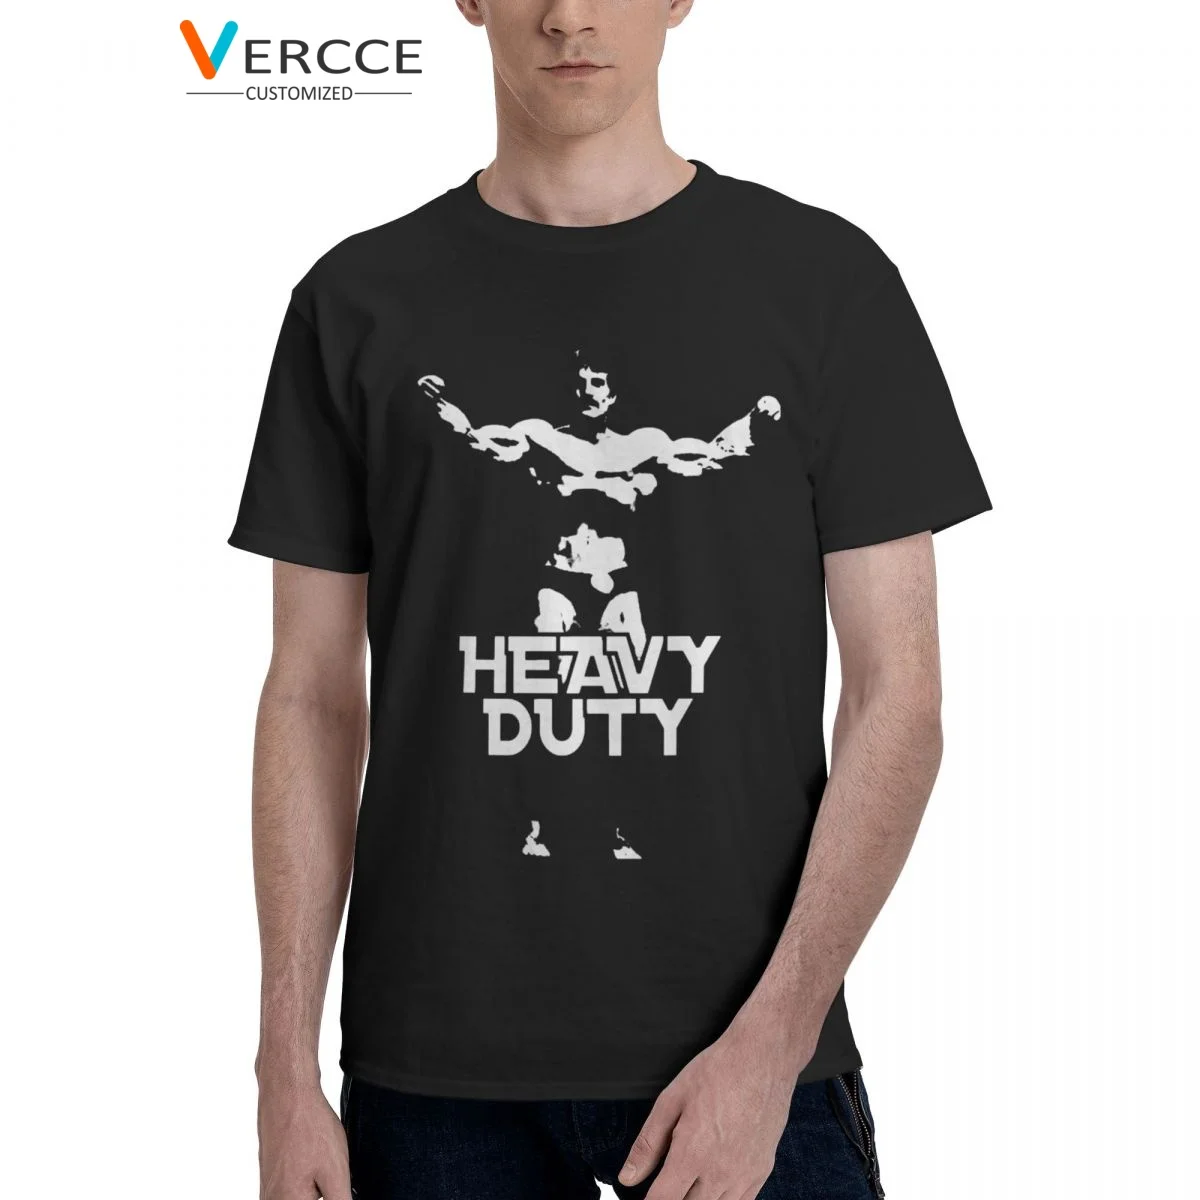 

Mike Mentzer Heavy Duty T Shirt Cotton High Quality Tees Clothing T Shirts For Men Women Gift Idea